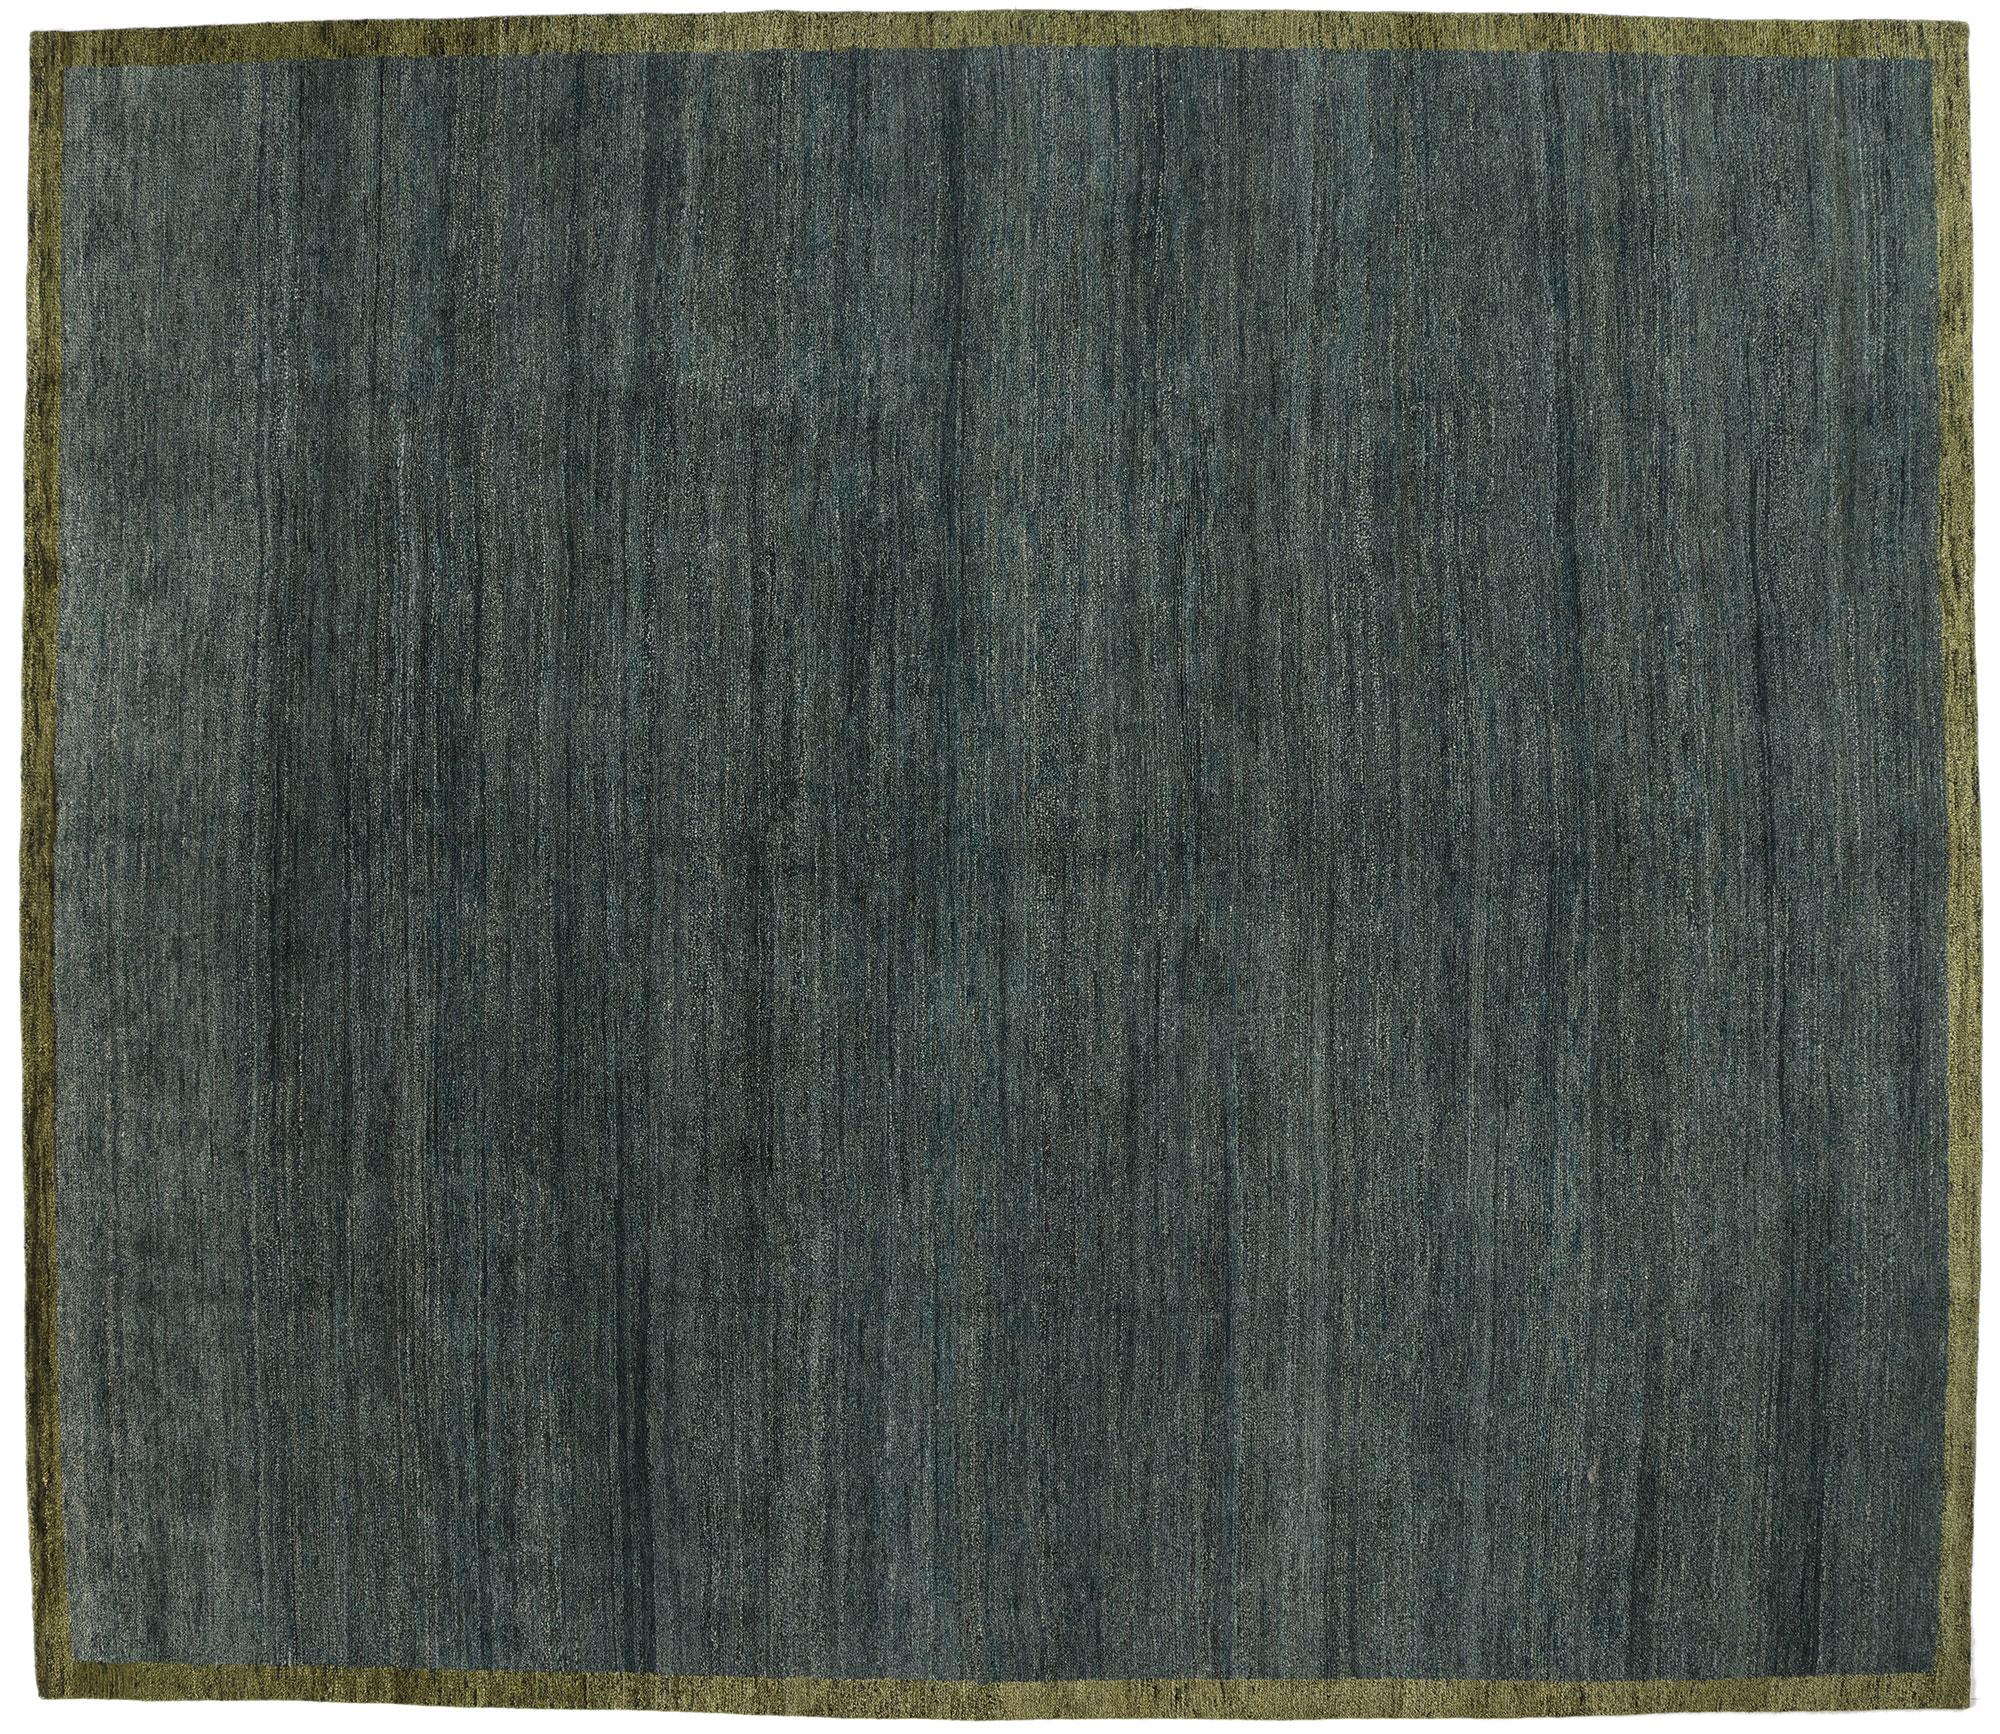 30990 Organic Modern Biophilic Moroccan Rug, 12'01 x 13'11. In the mystical realm of design, where shadows sway and secrets linger, Biophilia and the enigmatic charm of Japandi style converge with the serene essence of Zen principles. Within this